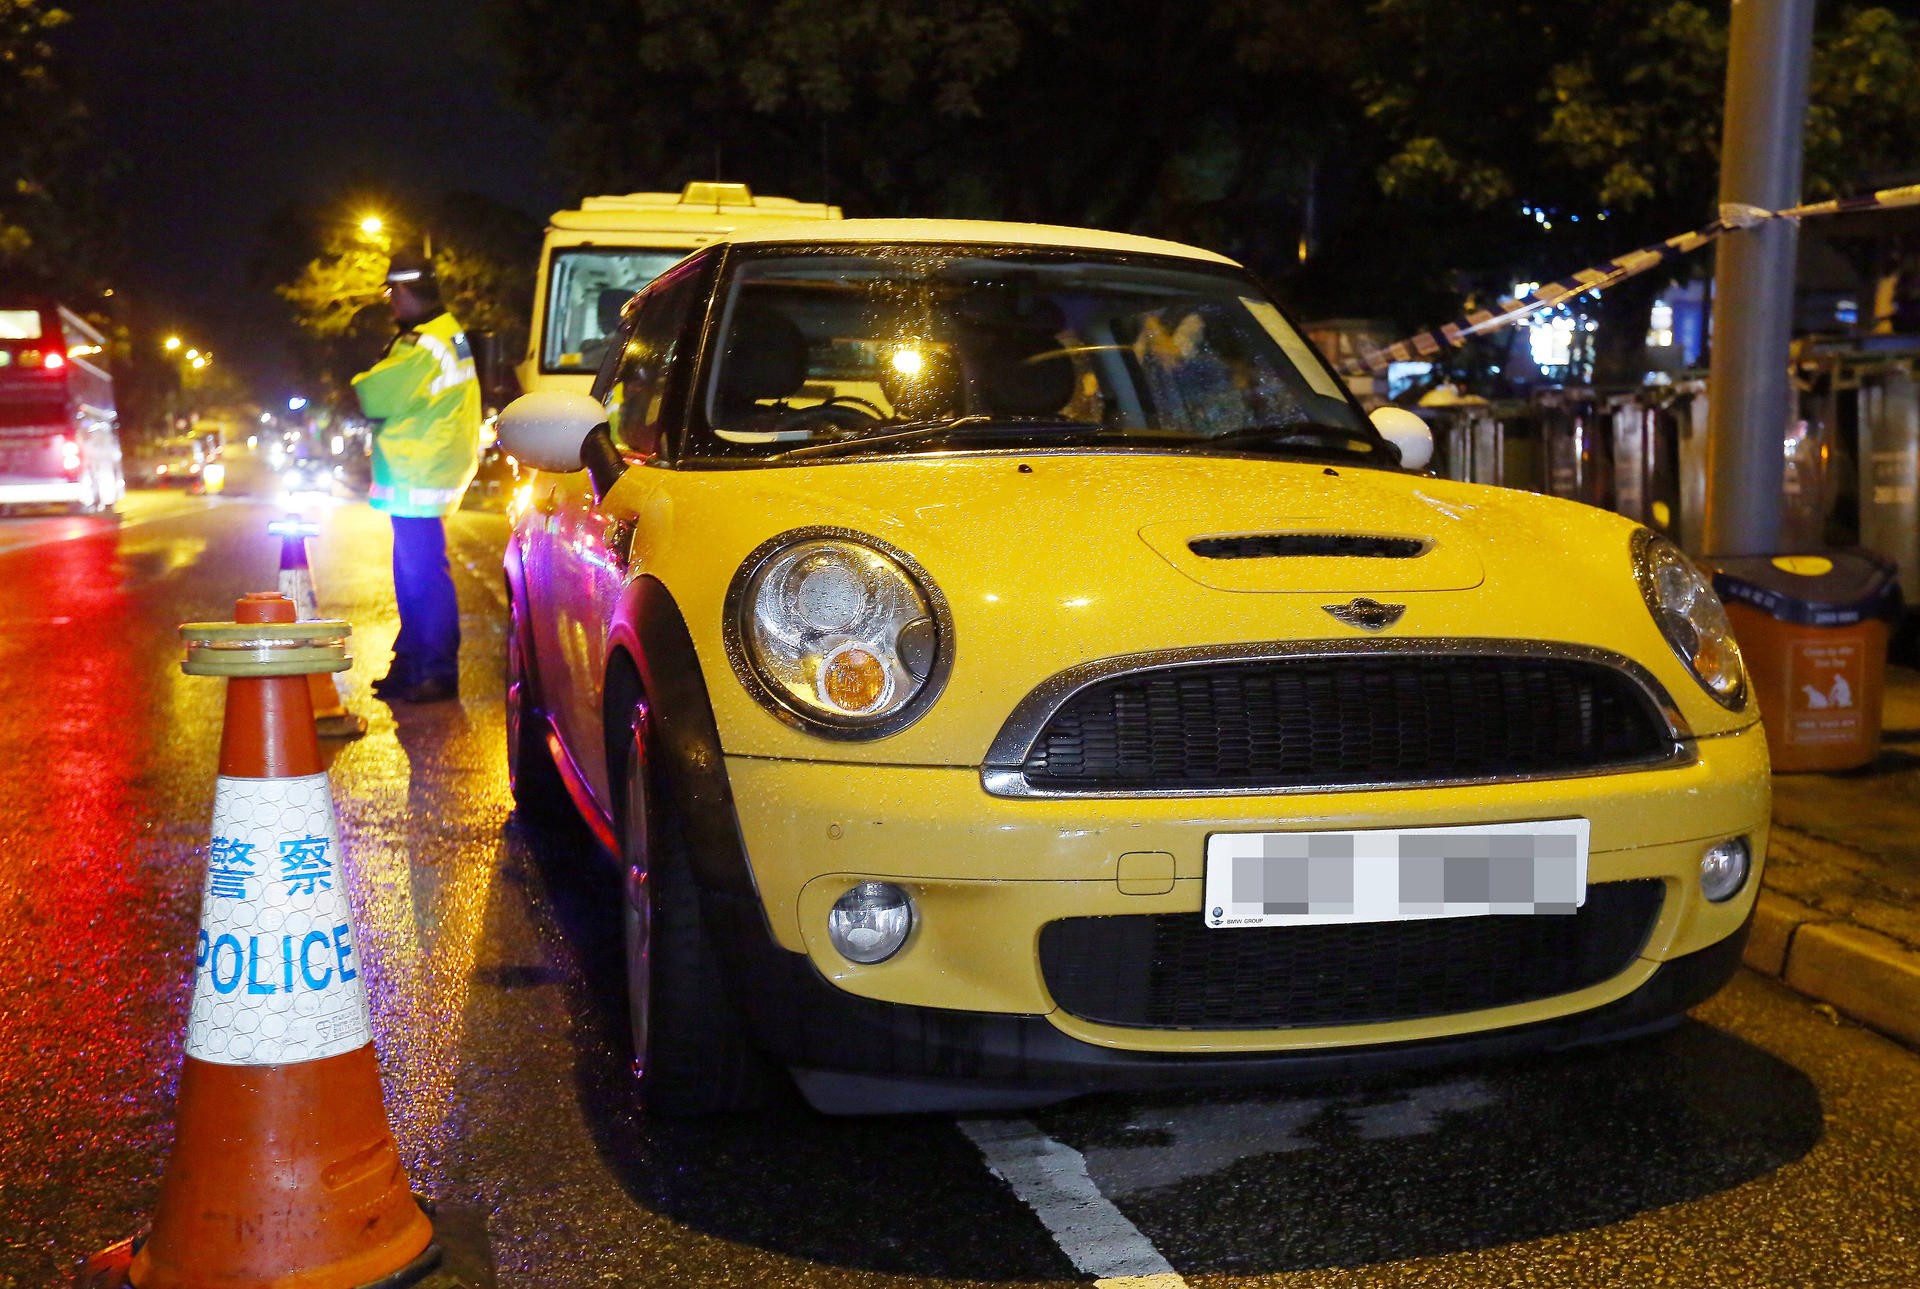 Wong Siew Fing and her daughter Lily Khaw Li Ling were found unresponsive inside this yellow Mini Cooper. Photo: Edmond So